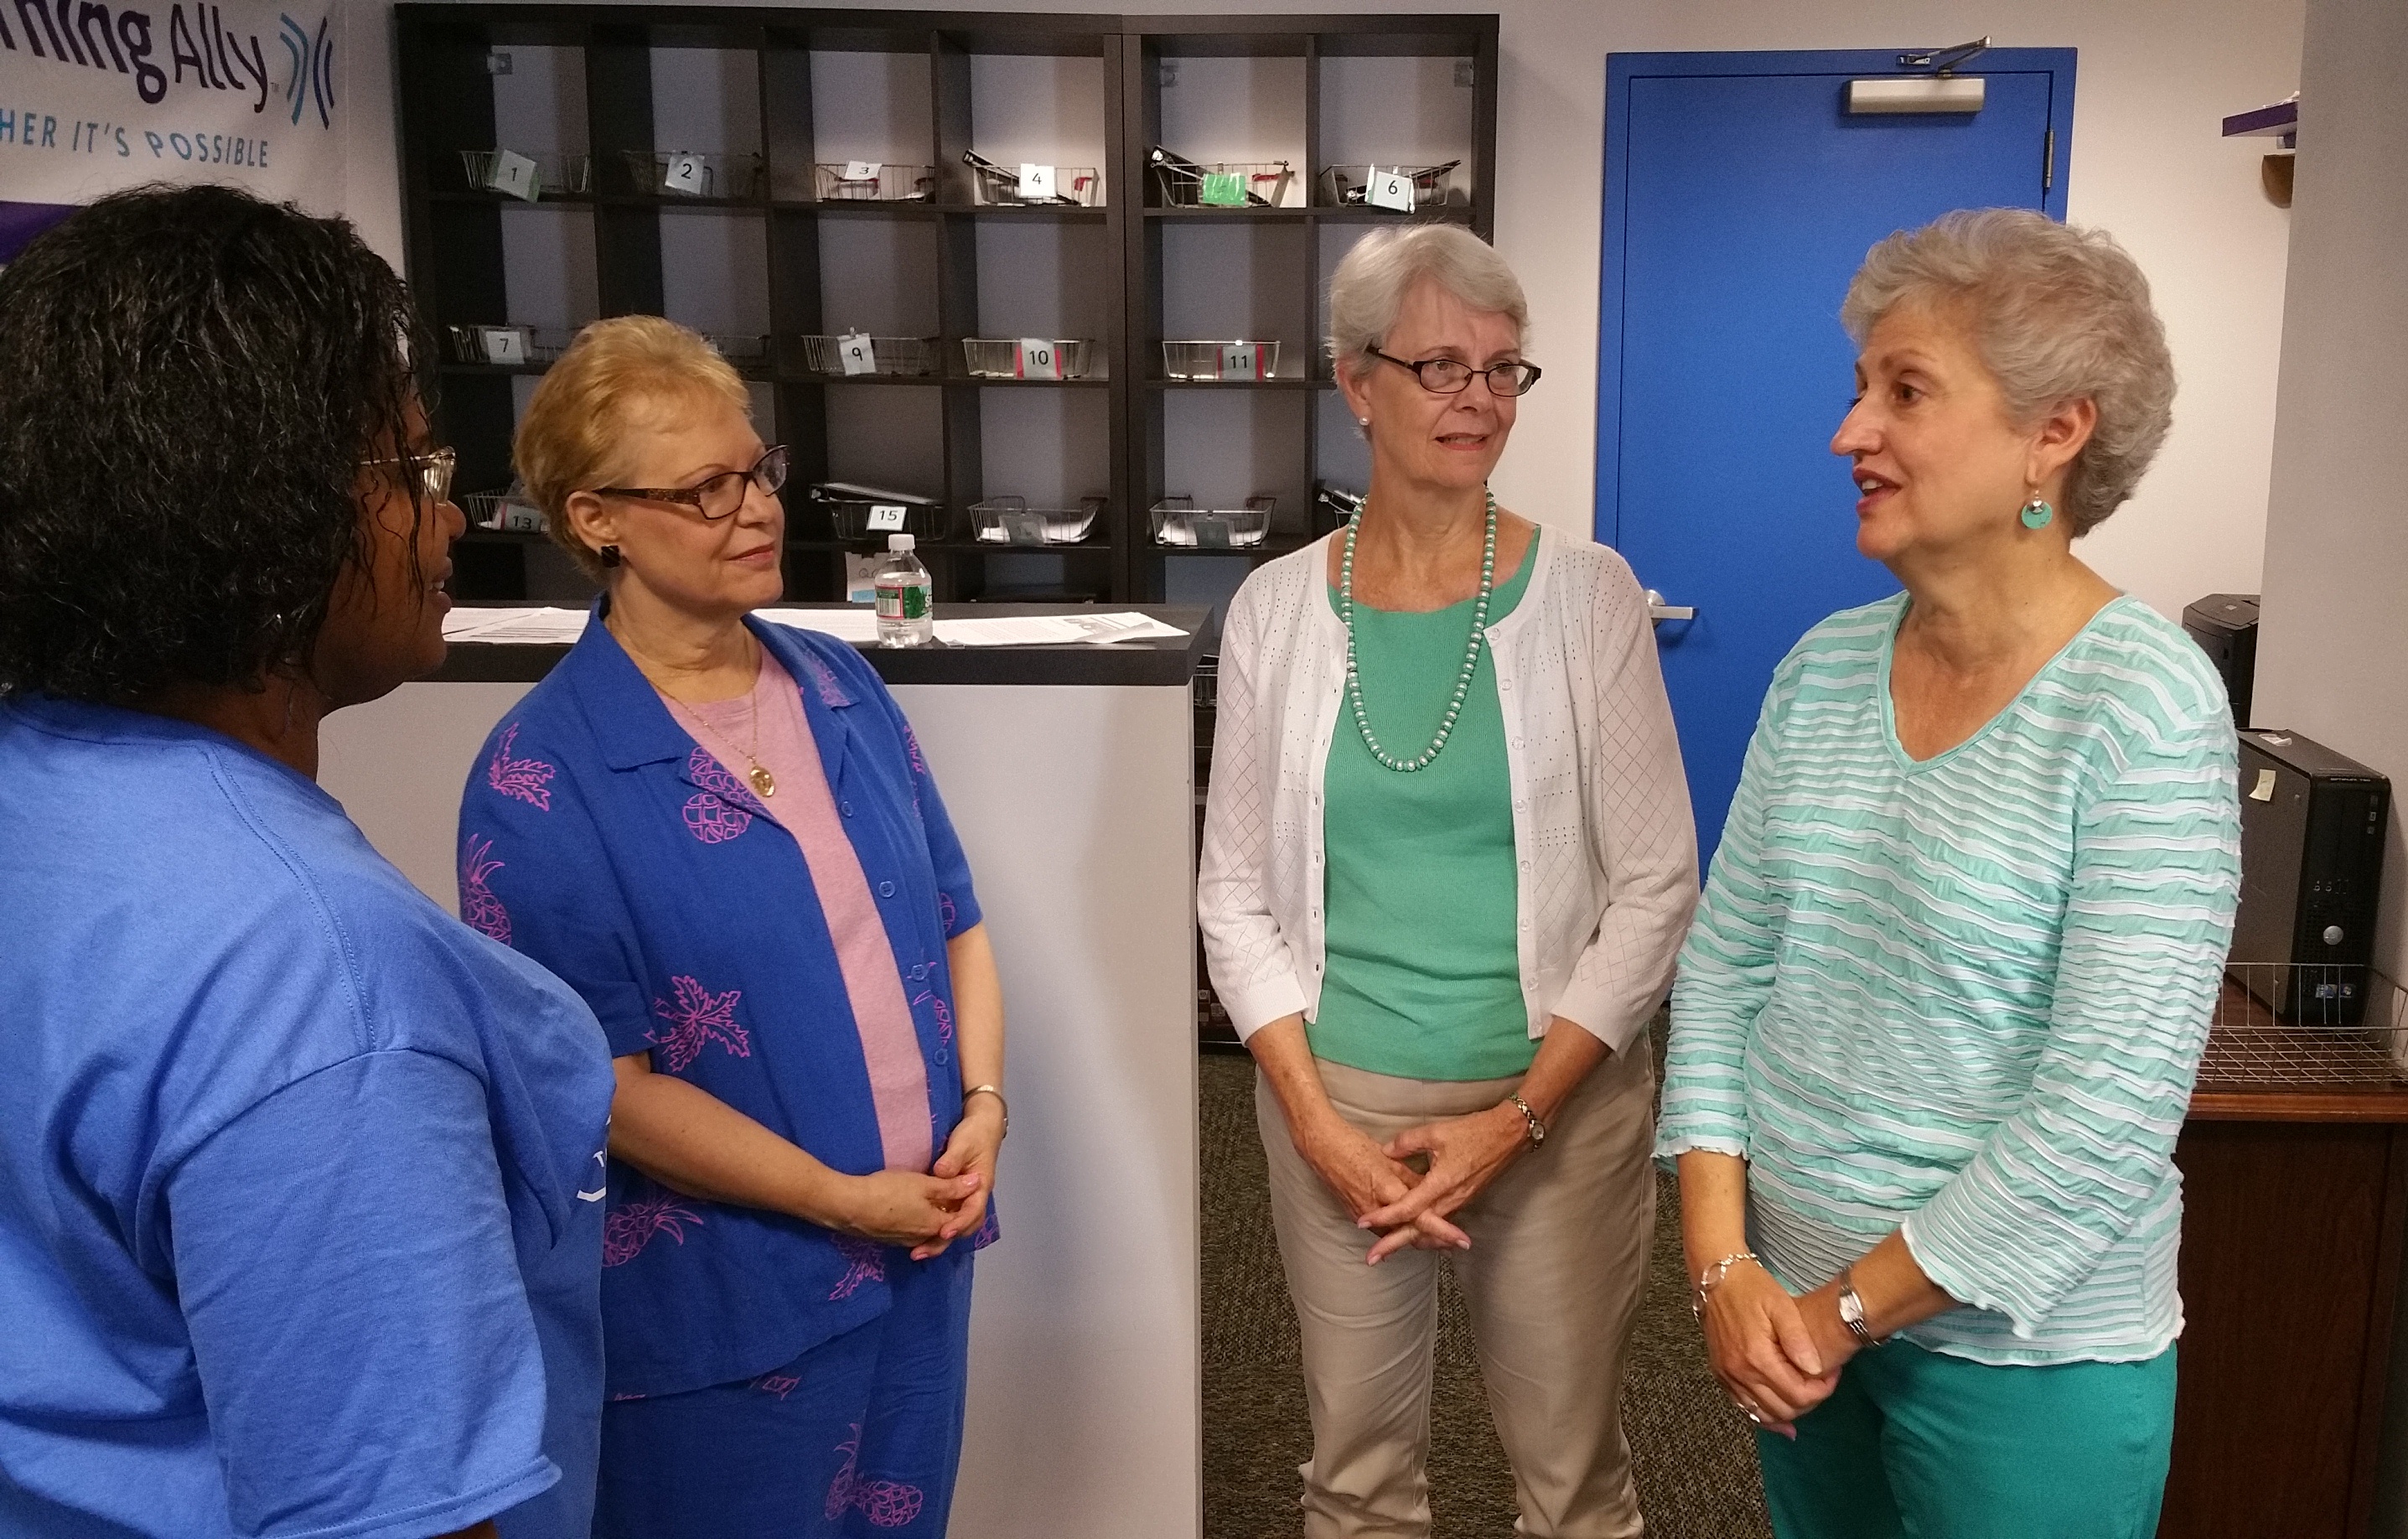 Volunteers Sue Ann Vajda, Pamela Ramsden, and Barbara Mavro help create audiobooks for students who are blind or dyslexic.